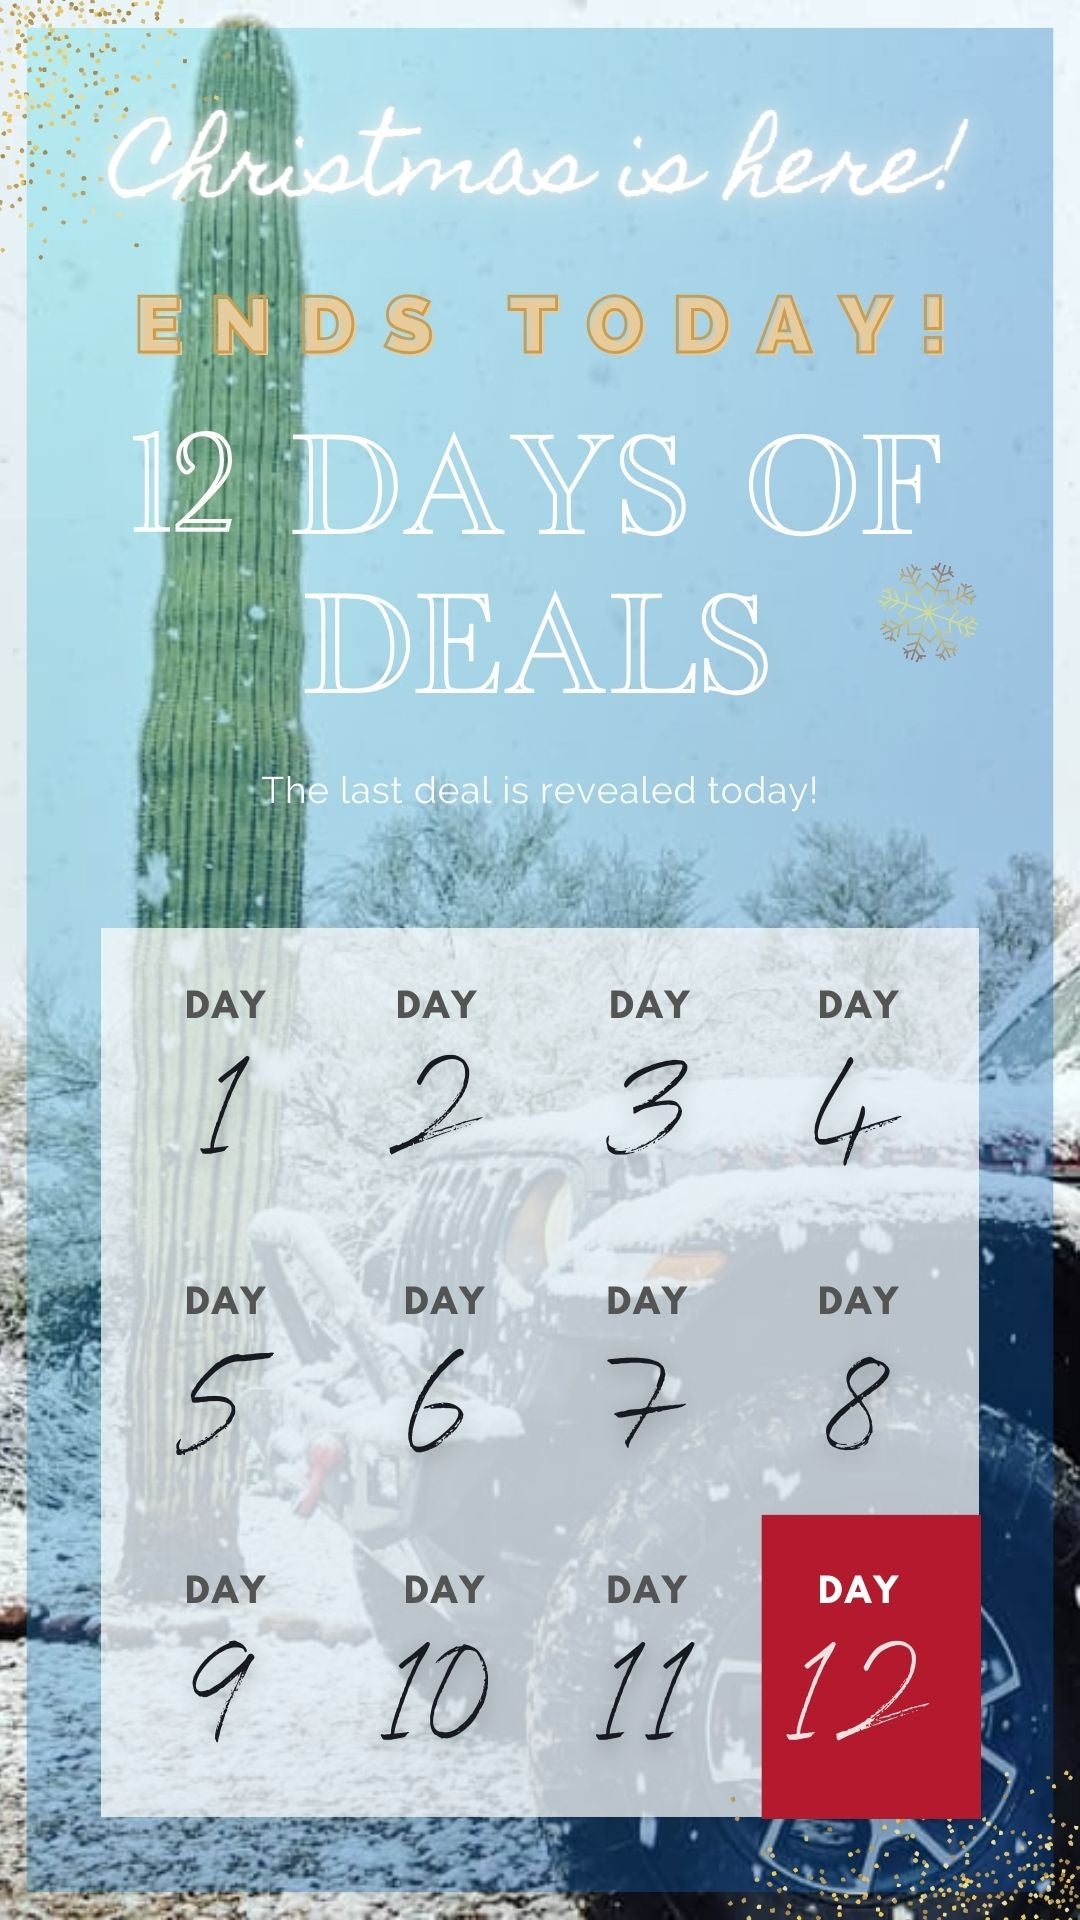 12 Days Of Christmas Deals: See Them All Here! Expire 12/24 11:59PM